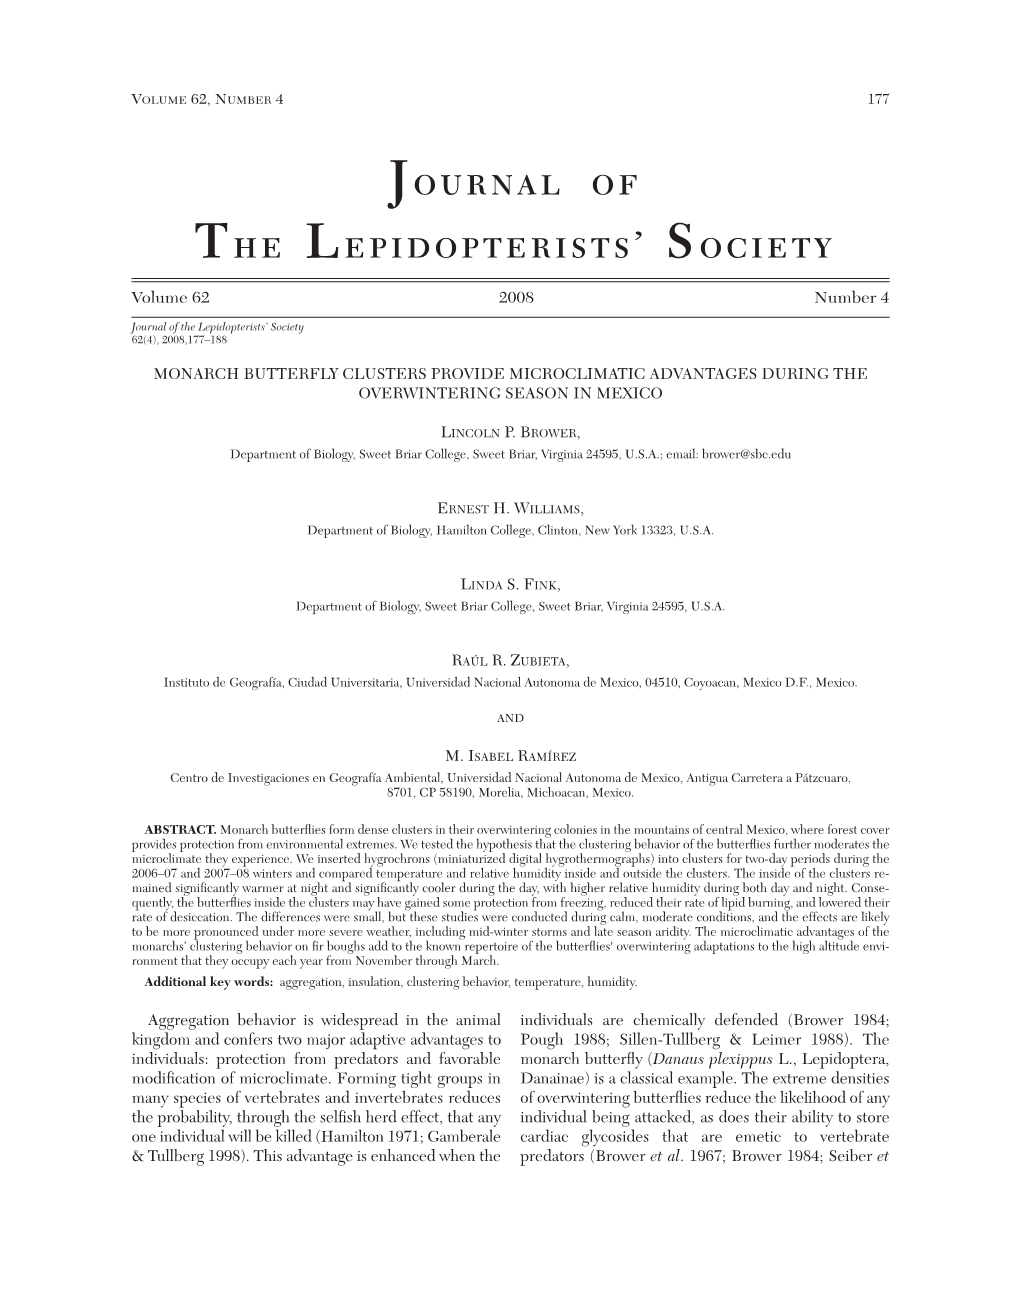 Journal of the Lepidopterists' Society